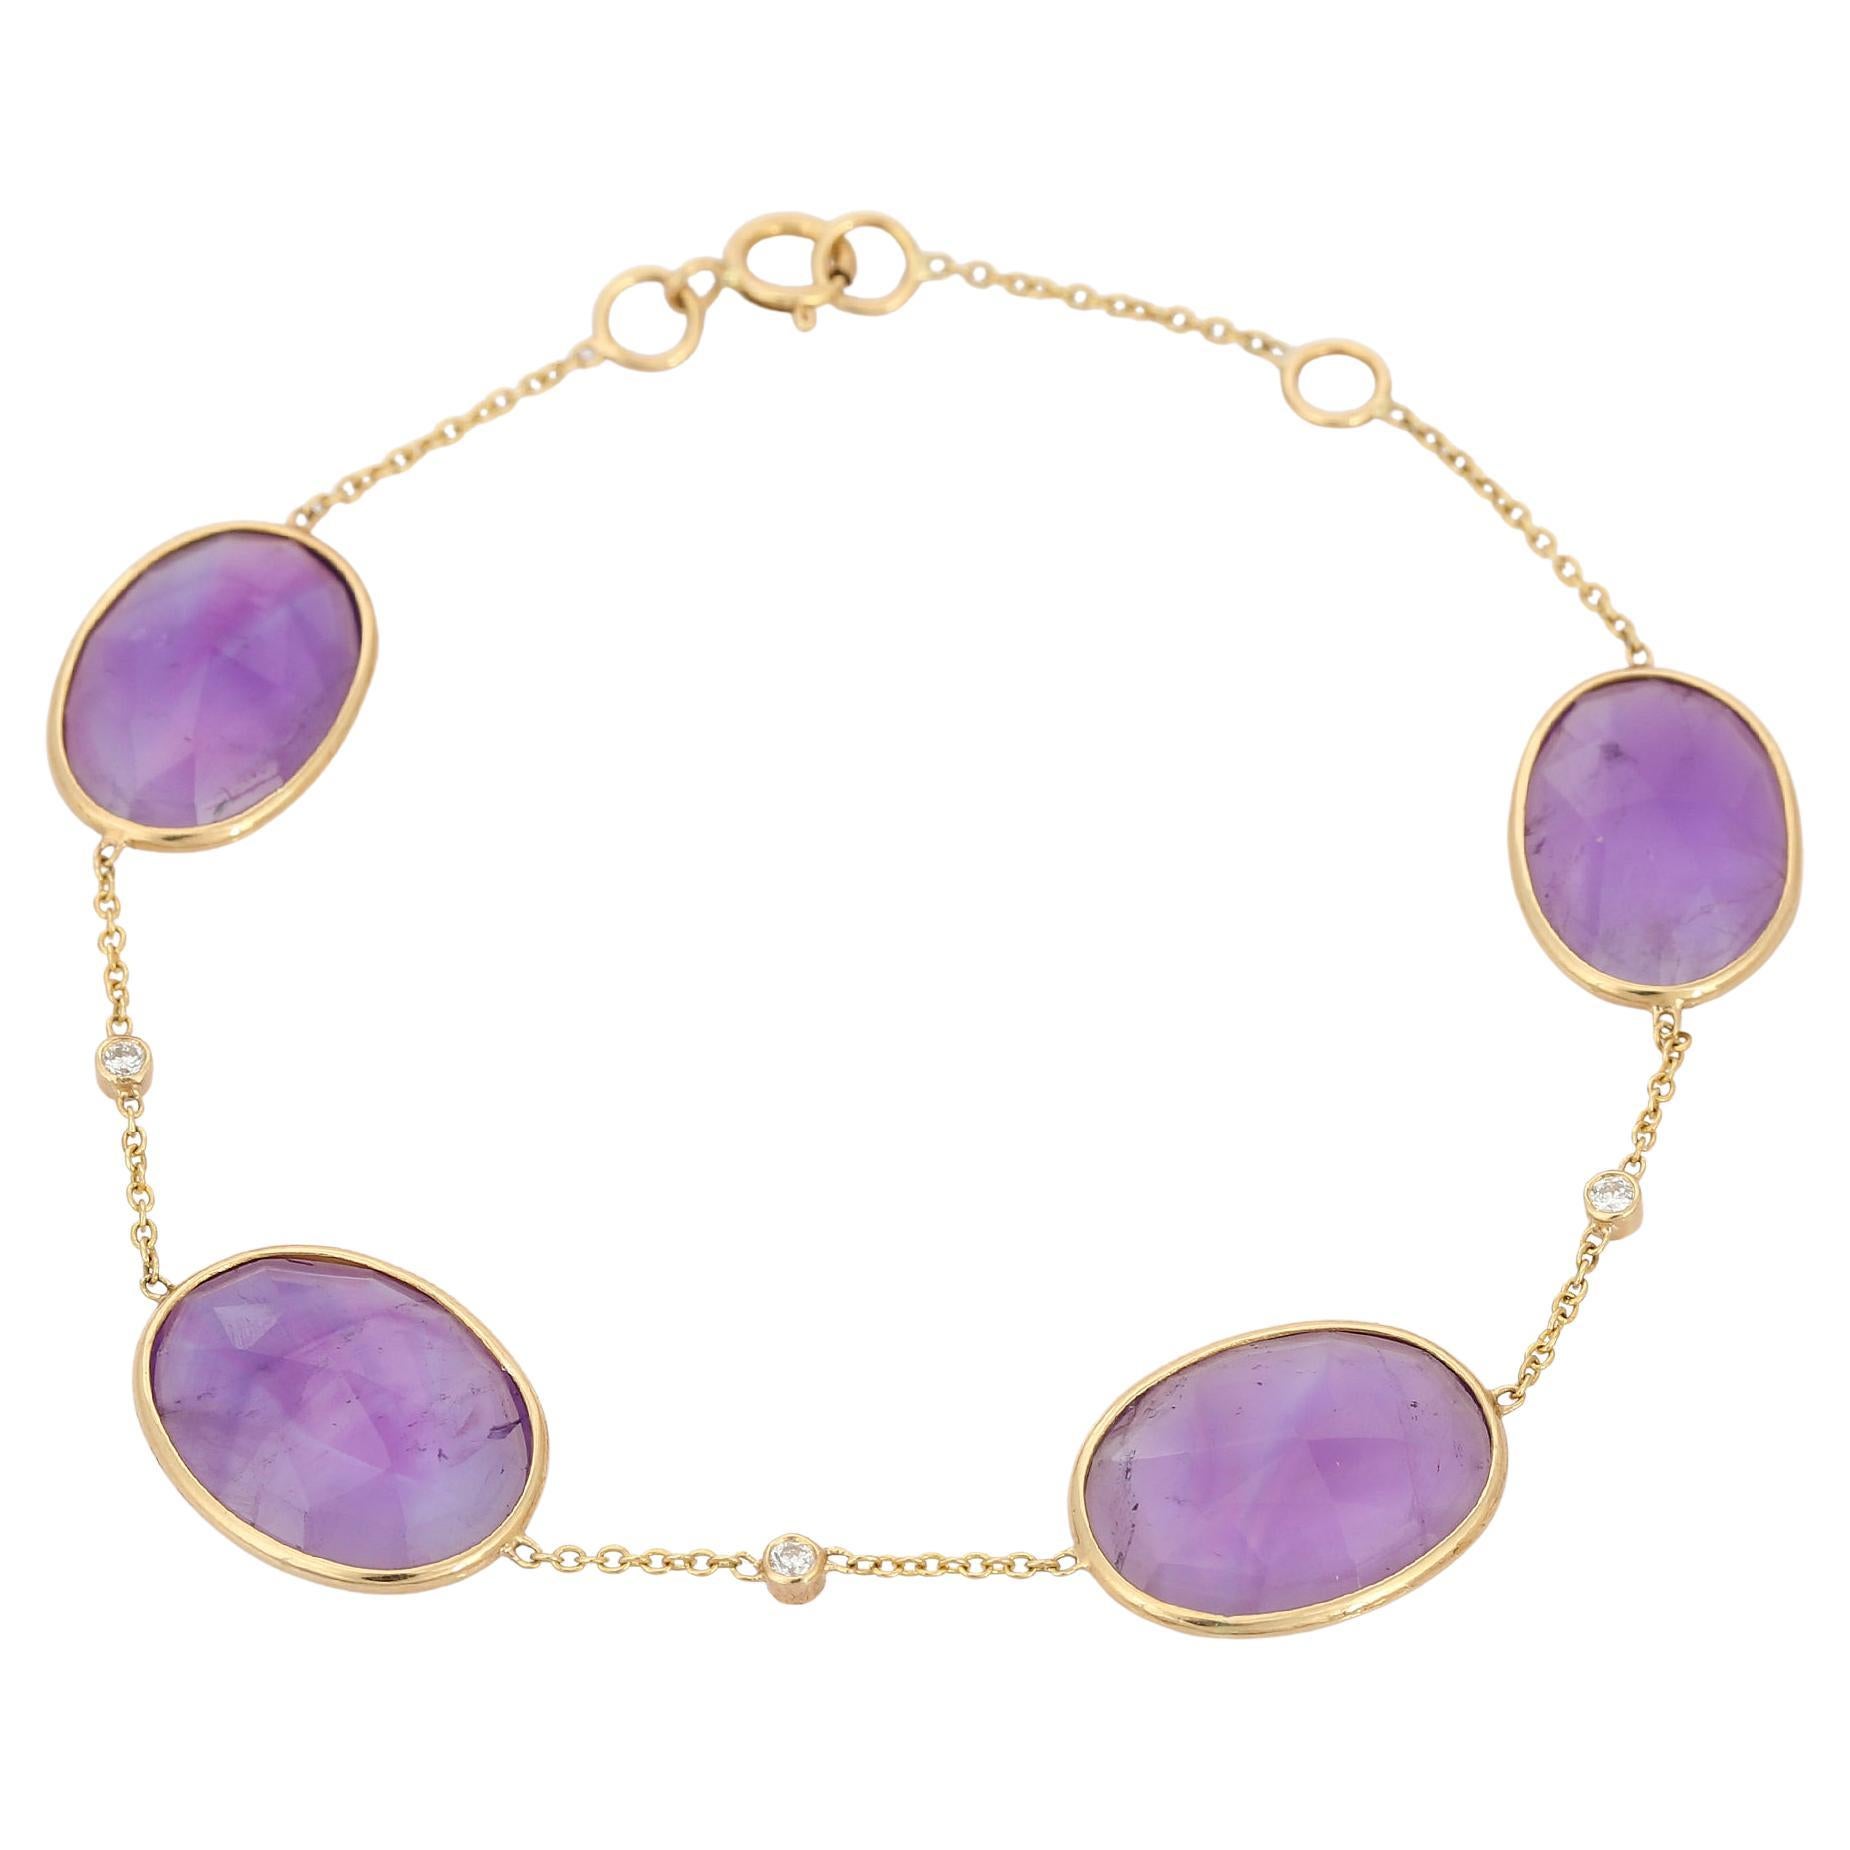 12.92 Ct Oval Cut Amethyst and Diamond Chain Bracelet in 18K Yellow Gold For Sale